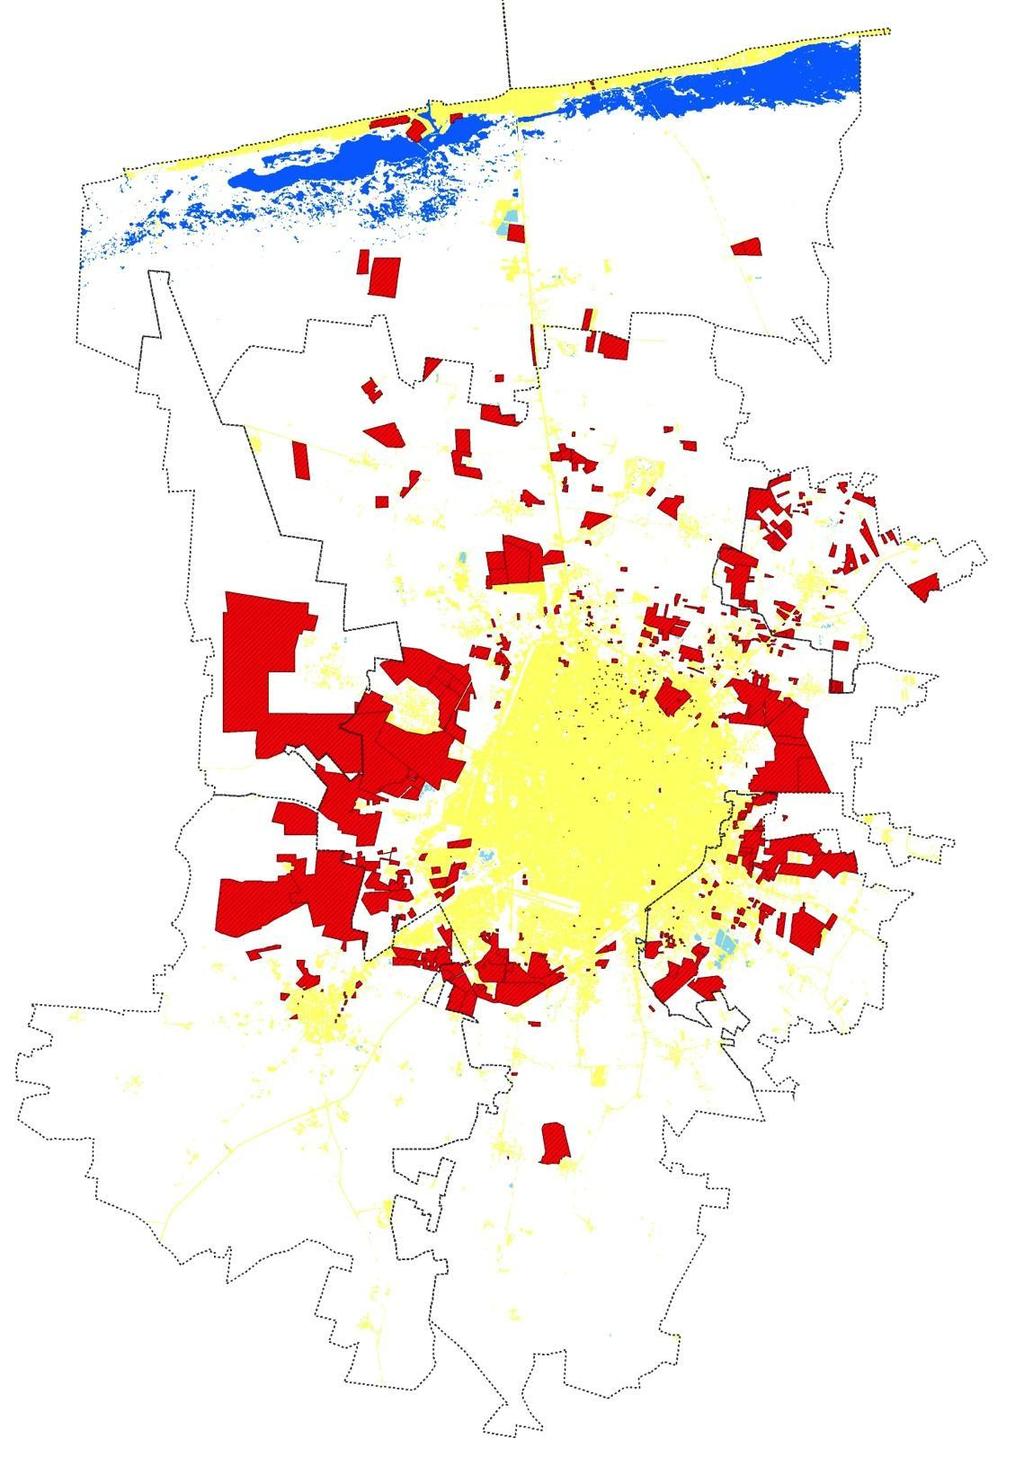 Urban Housing Real Estate Excess, 2014 Merida s Urban Area (2014) 24,335 ha Housing Projects (approbed or in a process of approbal, 2014): 15,678 ha Vacant Land within the City: 2,510 ha Total Urban